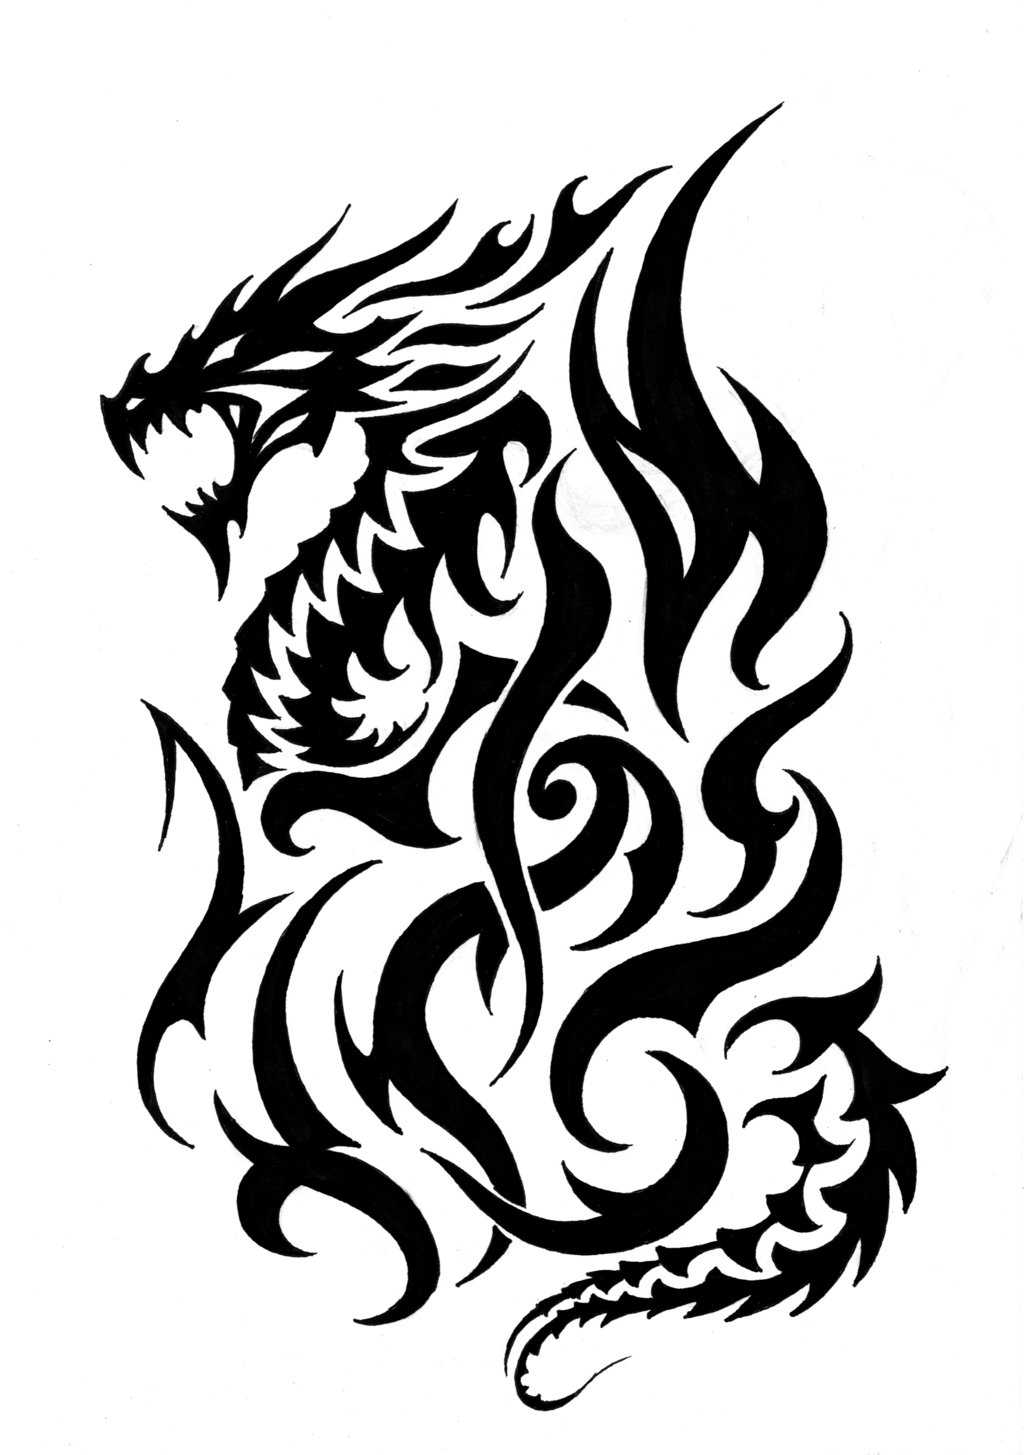 10 Tribal Fire Dragon Tattoos Designs   Free Cliparts That You Can